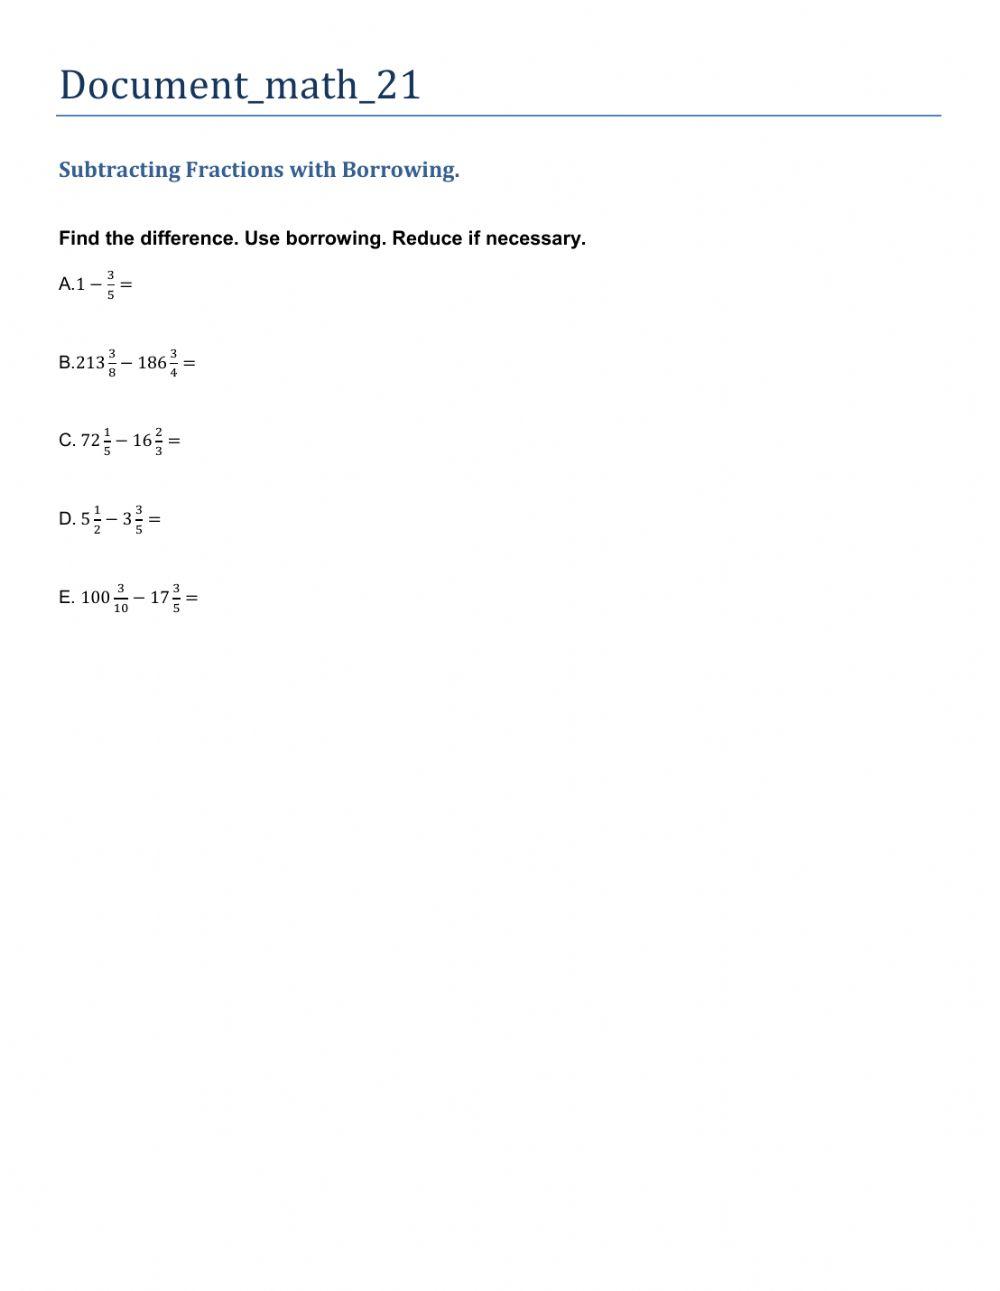 Subtracting with borrowing document-math-21